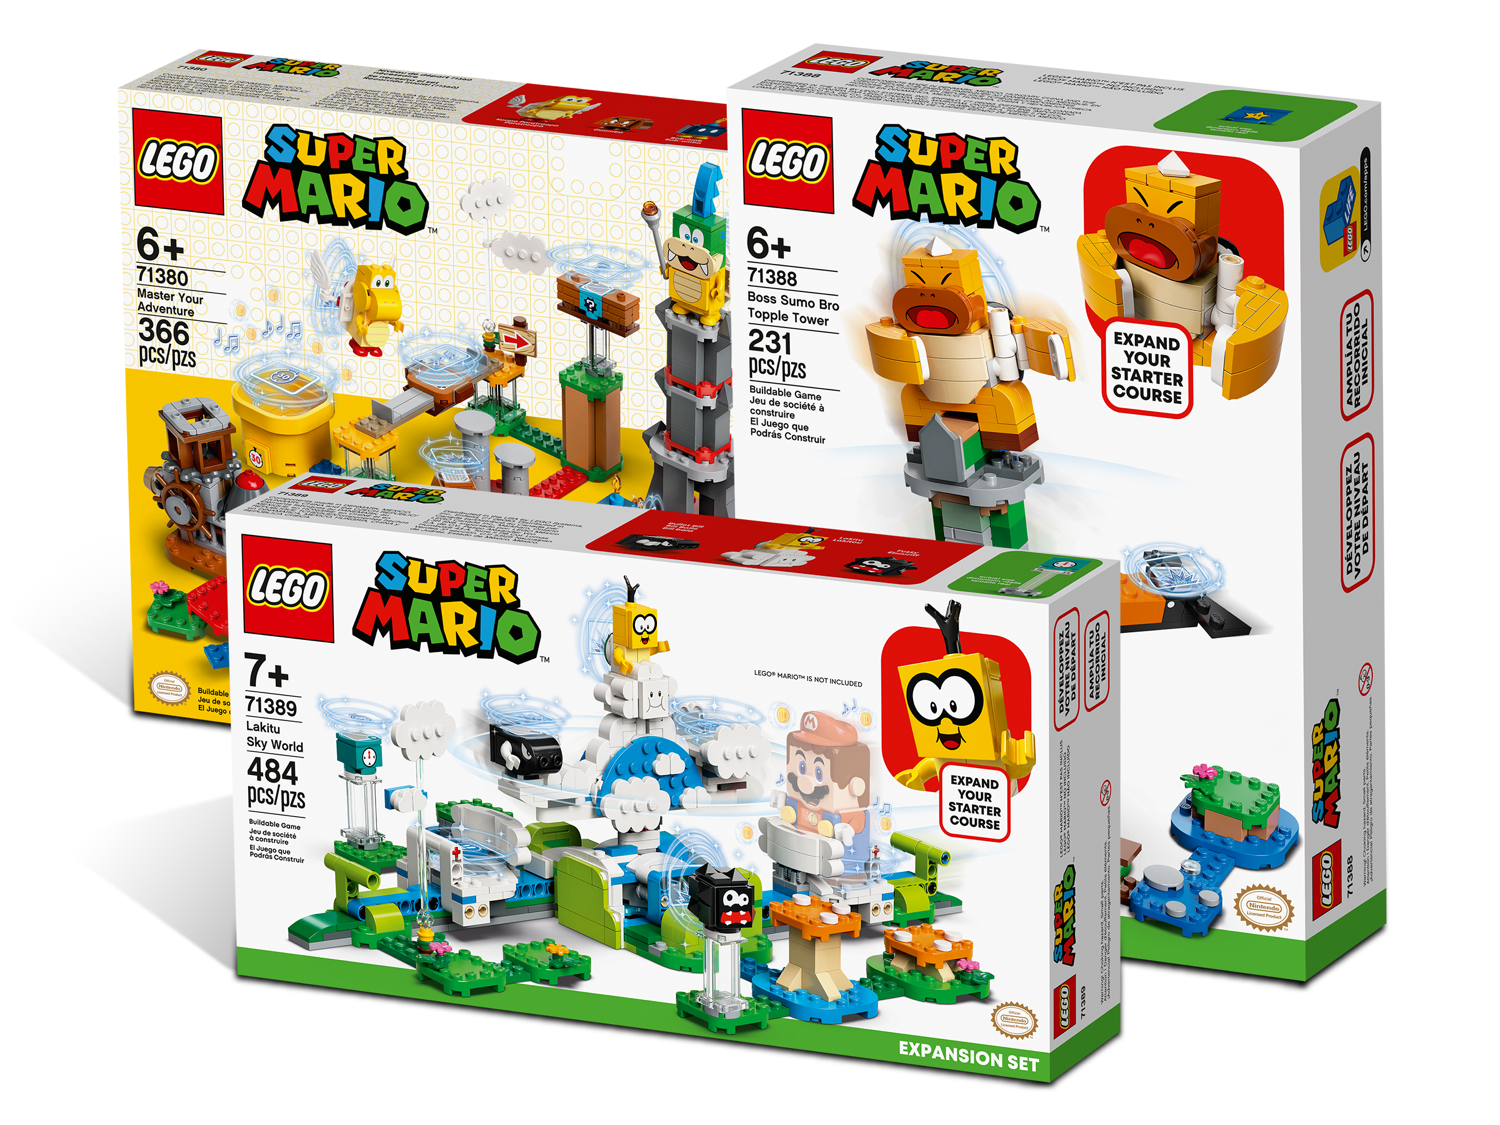 The Creative Bundle 5007061 LEGO® Super Mario™ | Buy online at the Official LEGO® US